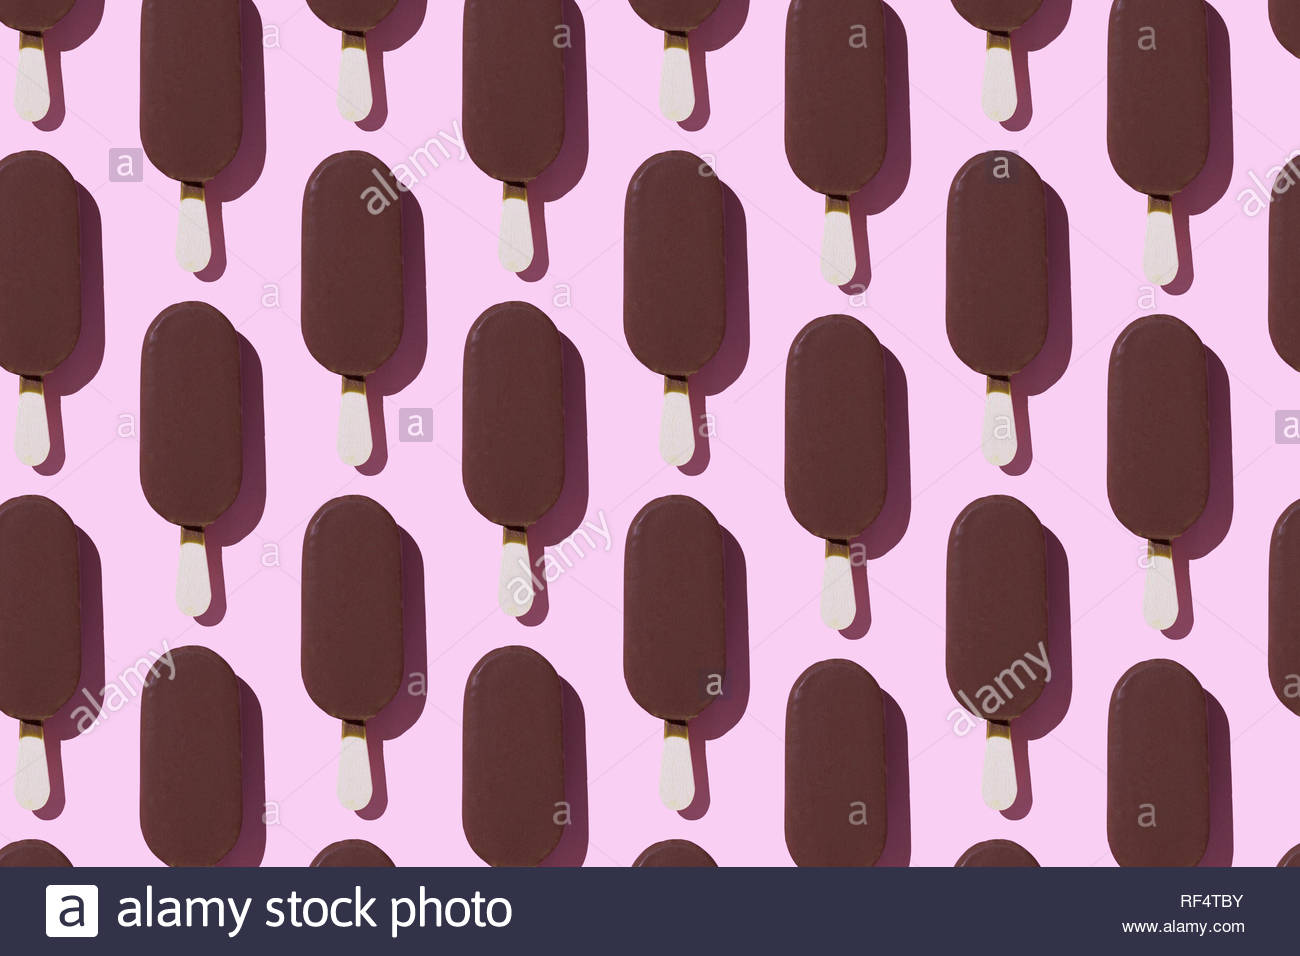 Ice Cream Popsicles Organized In A Row Over Pink Background Stock